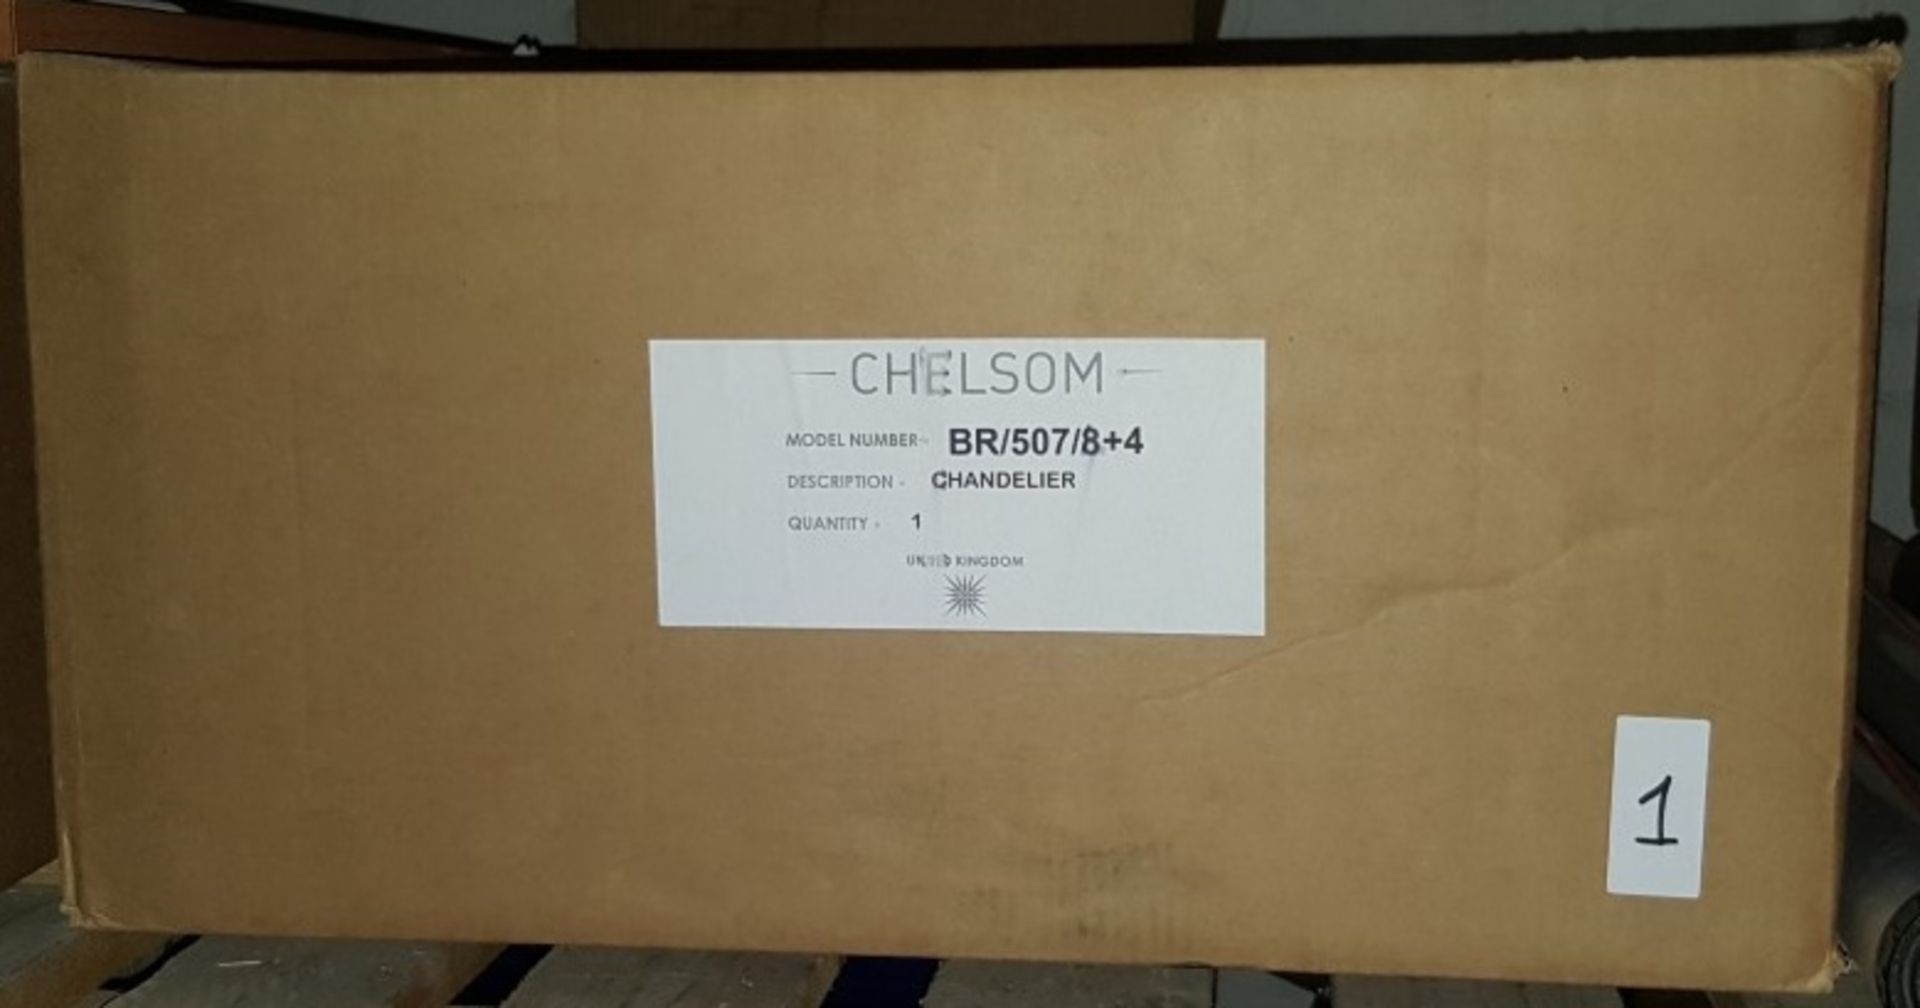 1 x Chelsom 2-Tier Сhandelier BR/507/8+4 - New & Boxed - CL001 - REF289/A31 - Location: Altrincham - Image 3 of 3